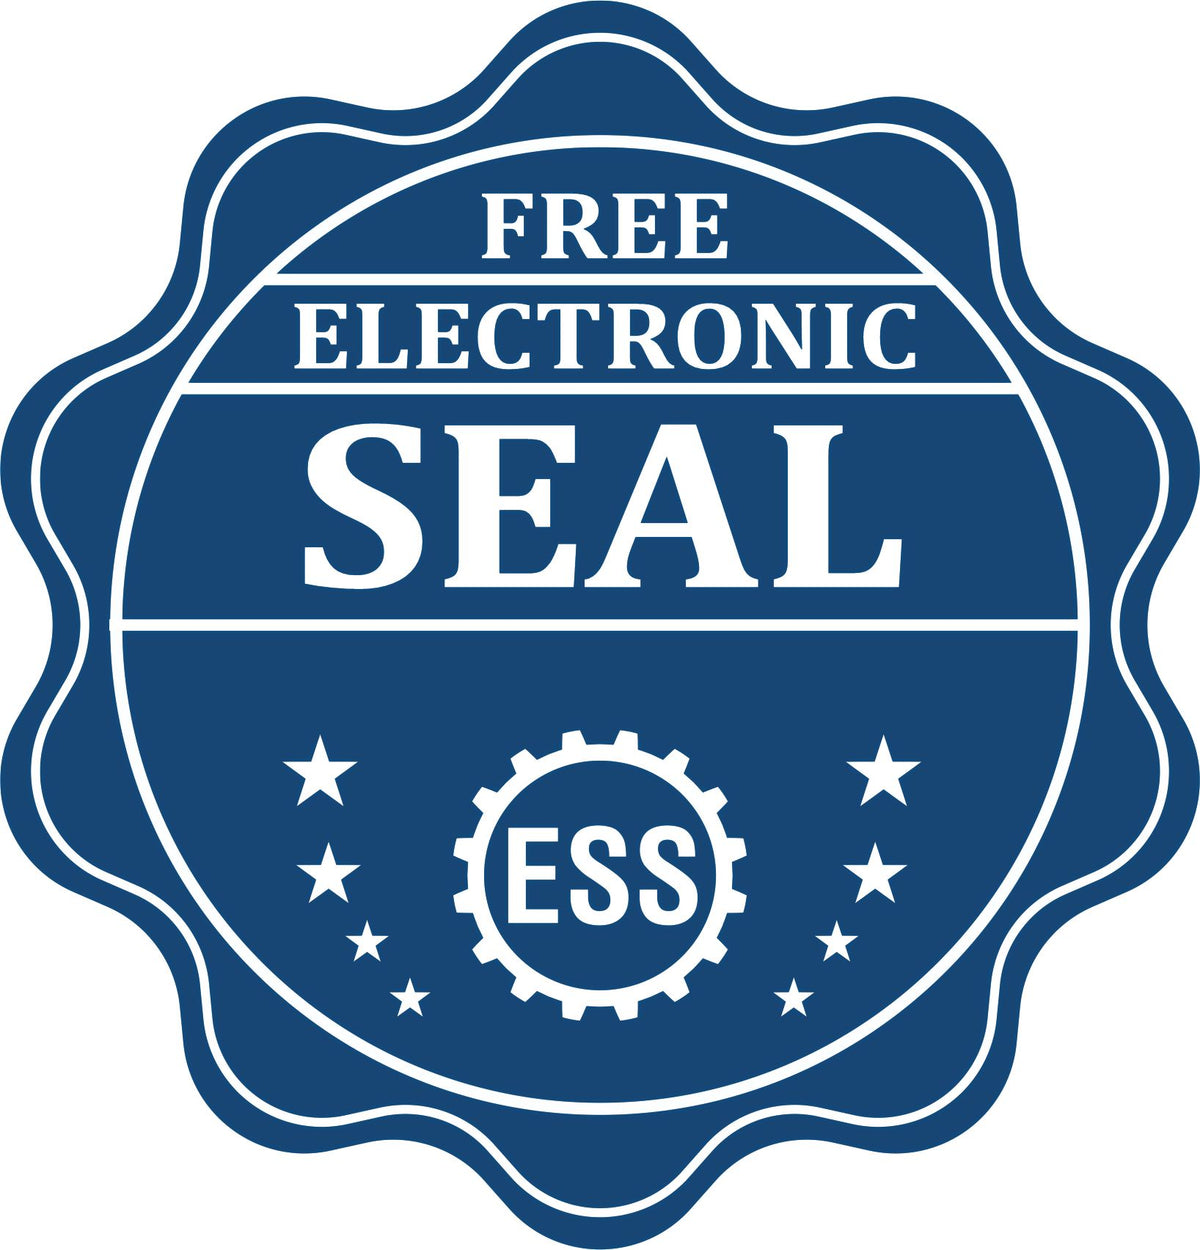 A badge showing a free electronic seal for the Gift Ohio Landscape Architect Seal with stars and the ESS gear on the emblem.